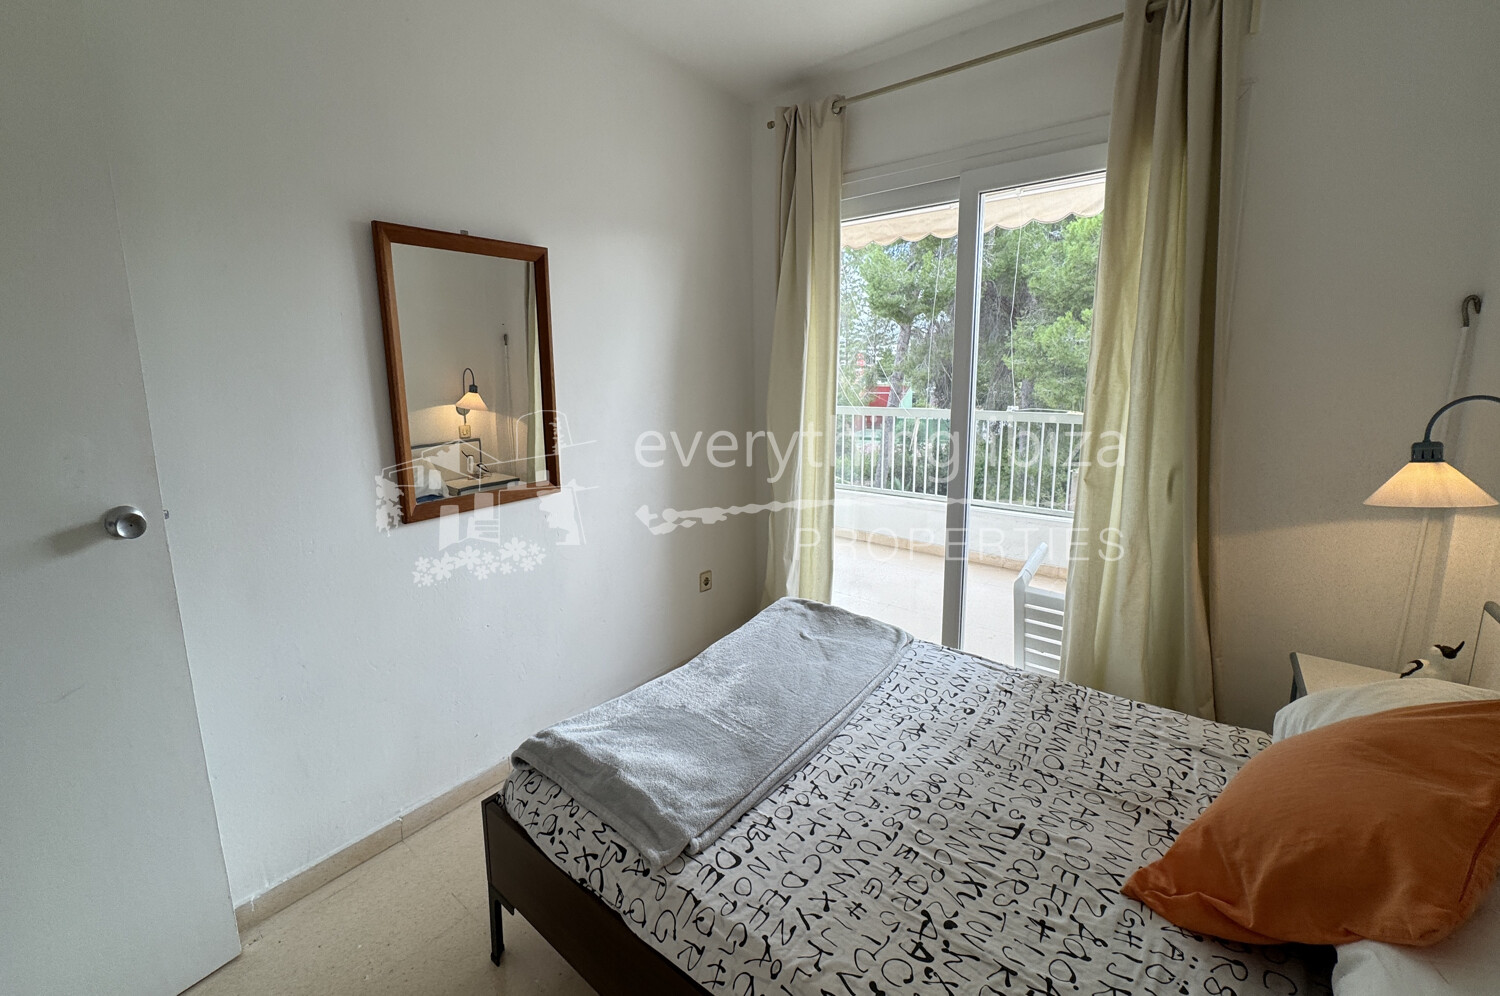 Charming One Bed Apartment Close to the Beach and Bay, ref. 1635, for sale in Ibiza by everything ibiza Properties